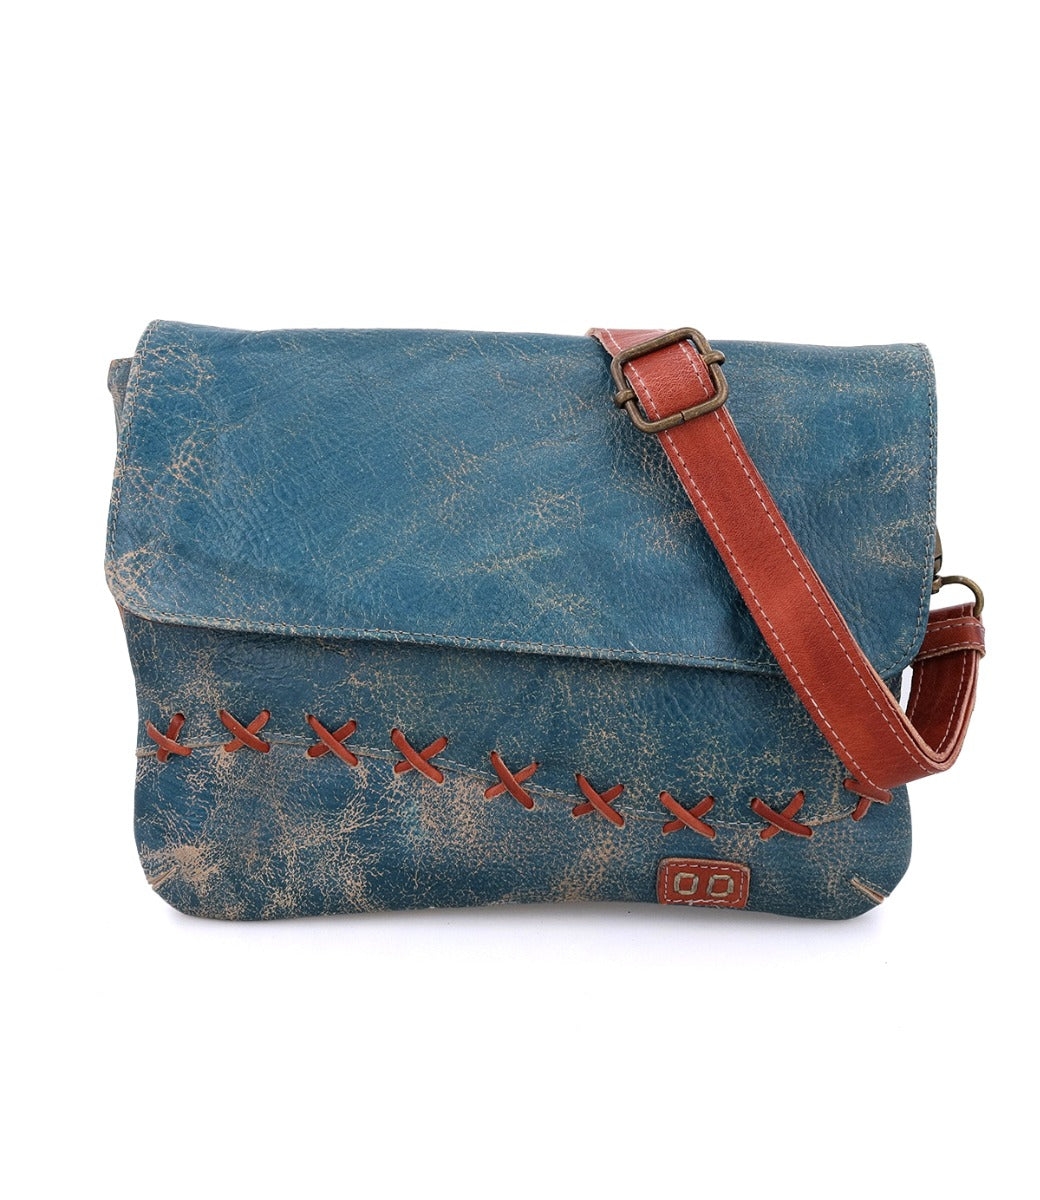 A blue and red leather Cleo crossbody bag by Bed Stu.